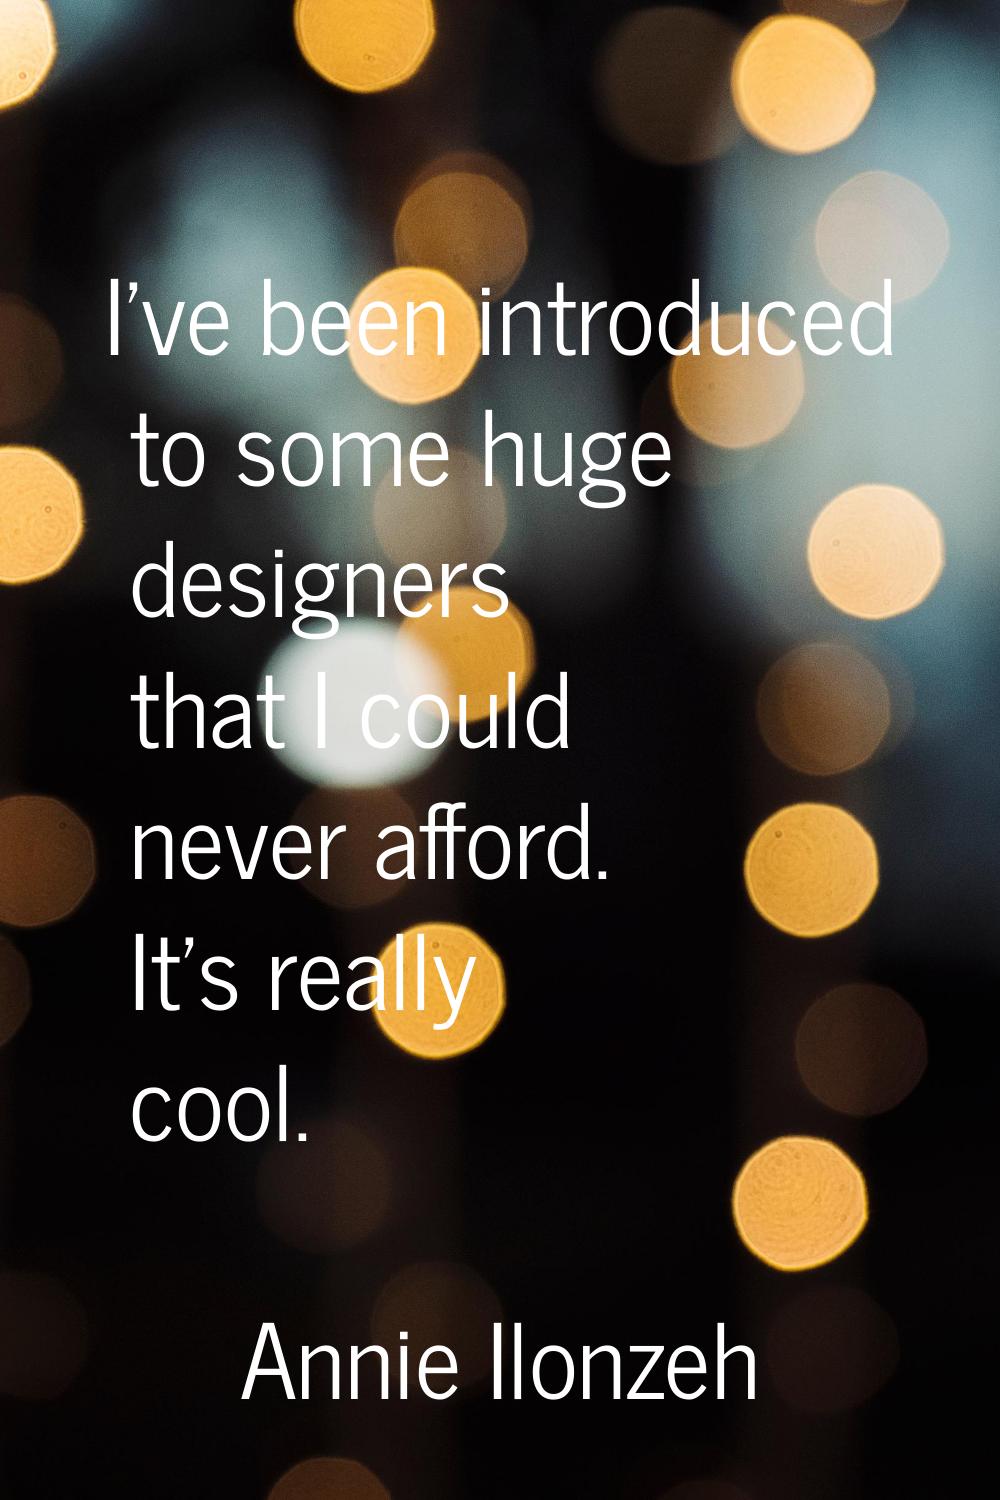 I've been introduced to some huge designers that I could never afford. It's really cool.